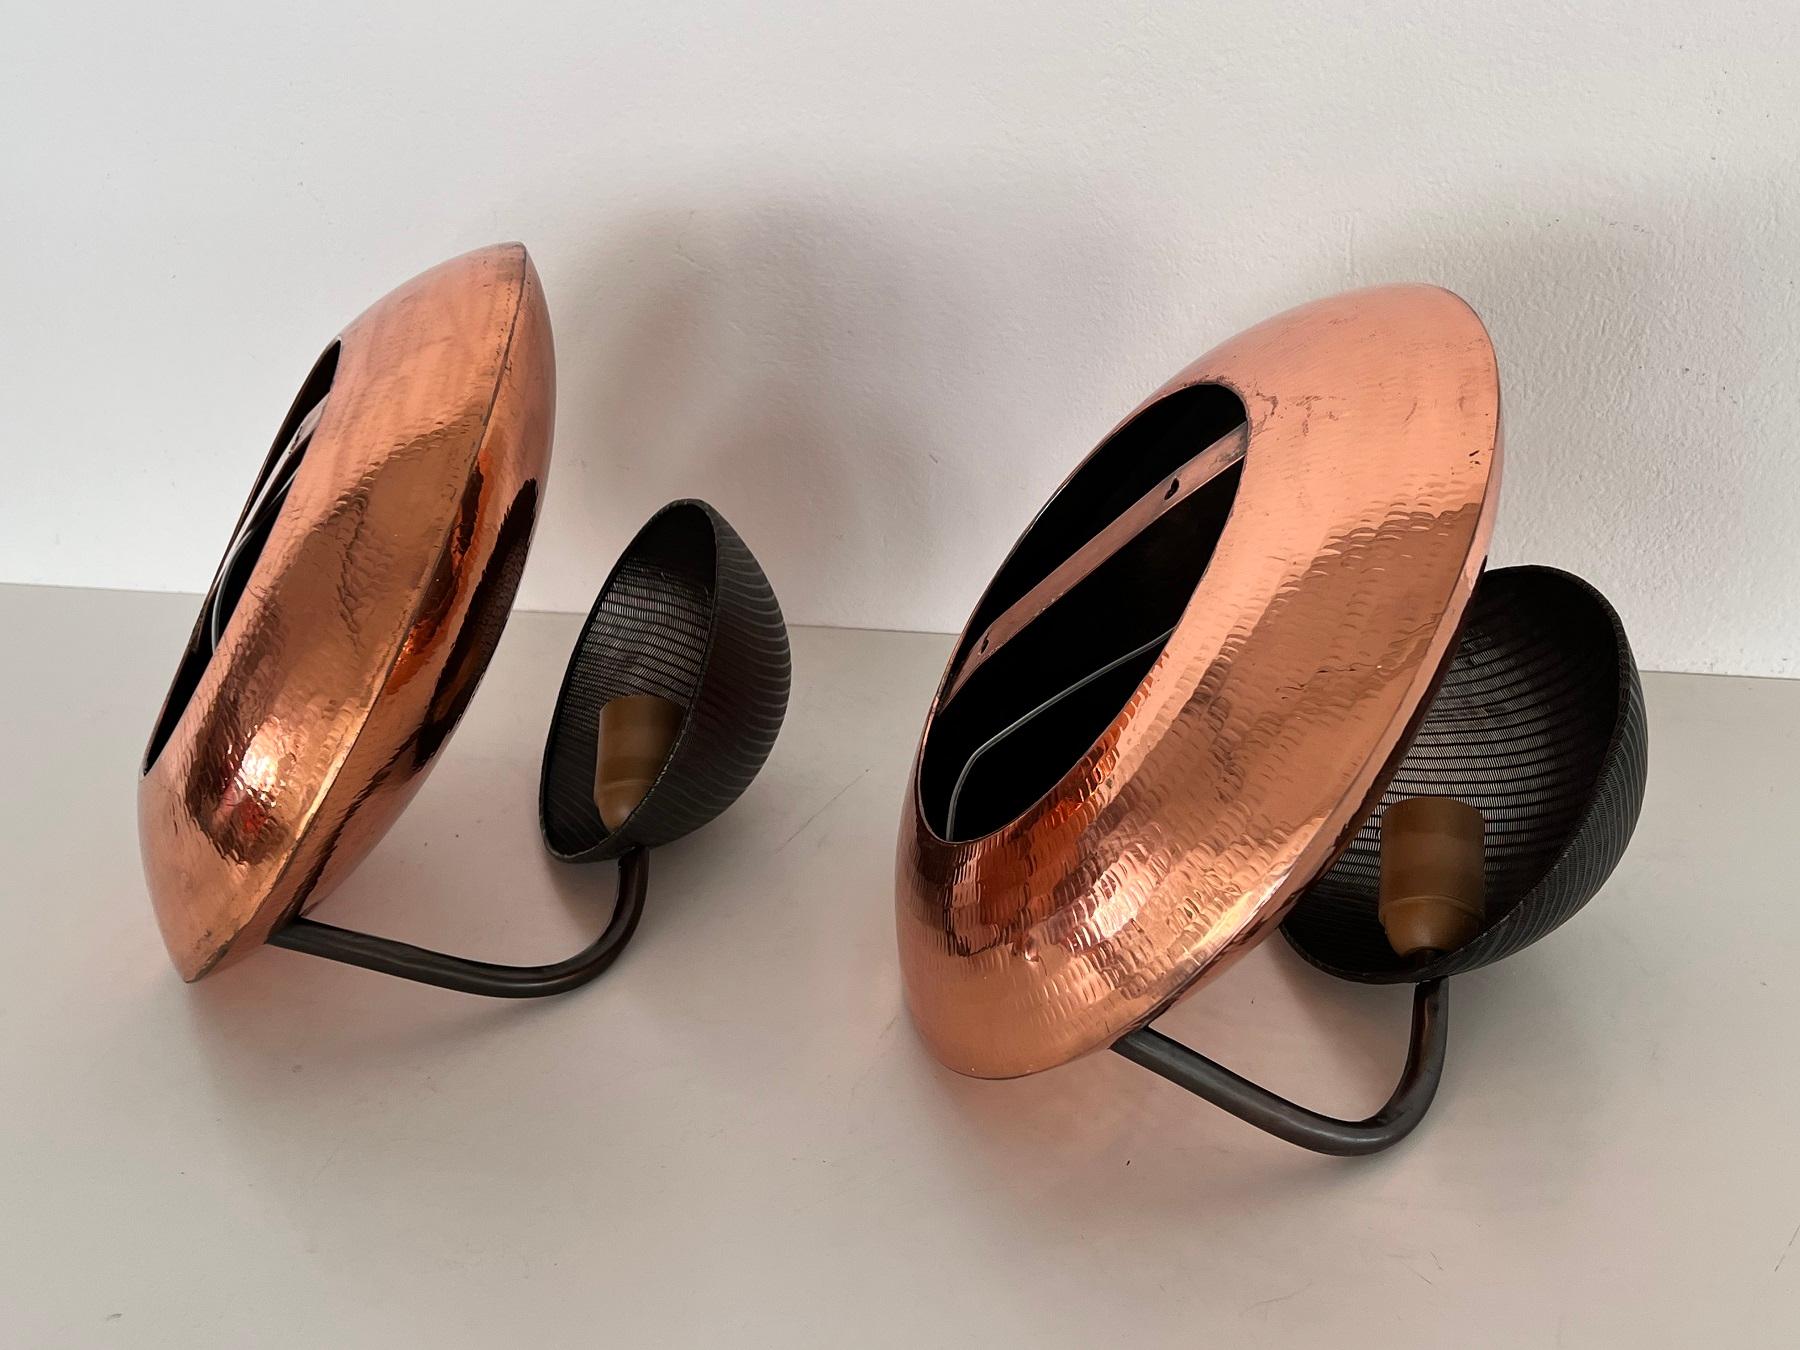 Pair of Italian Wall Sconces in Copper and Black Perforated Metal, 1970s For Sale 8